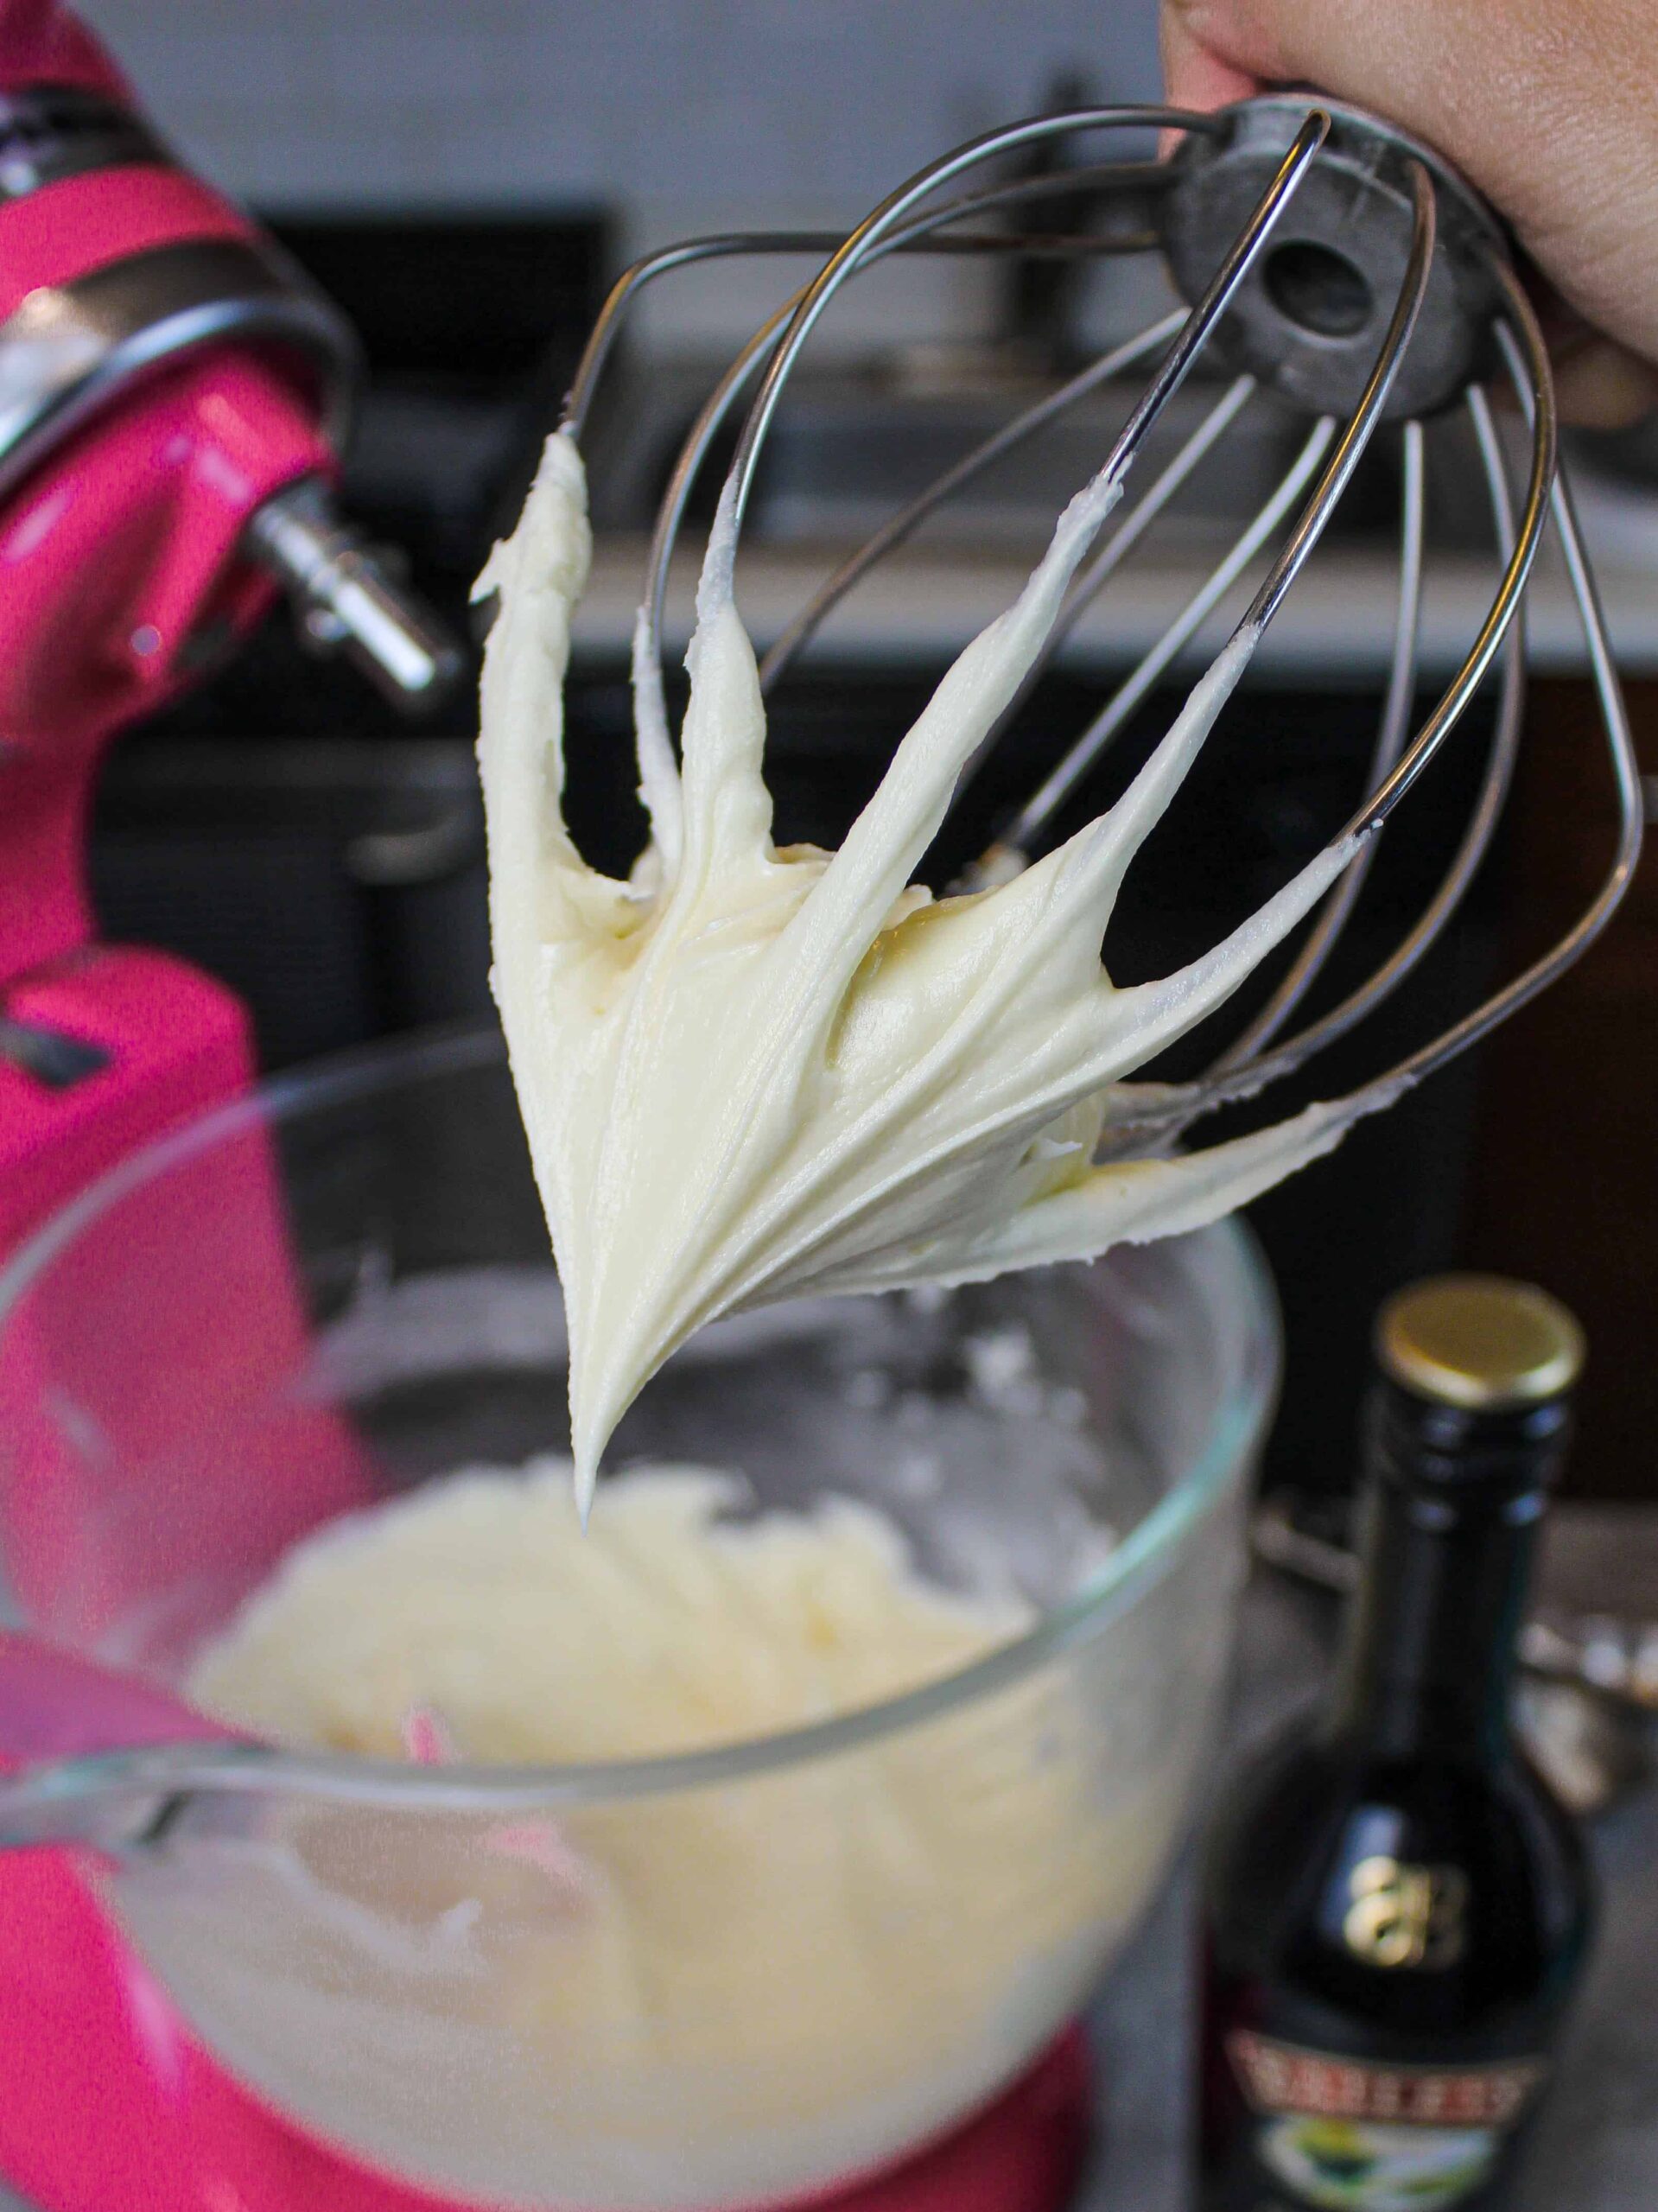 image of baileys frosting on a whisk attachment to show how smooth it is